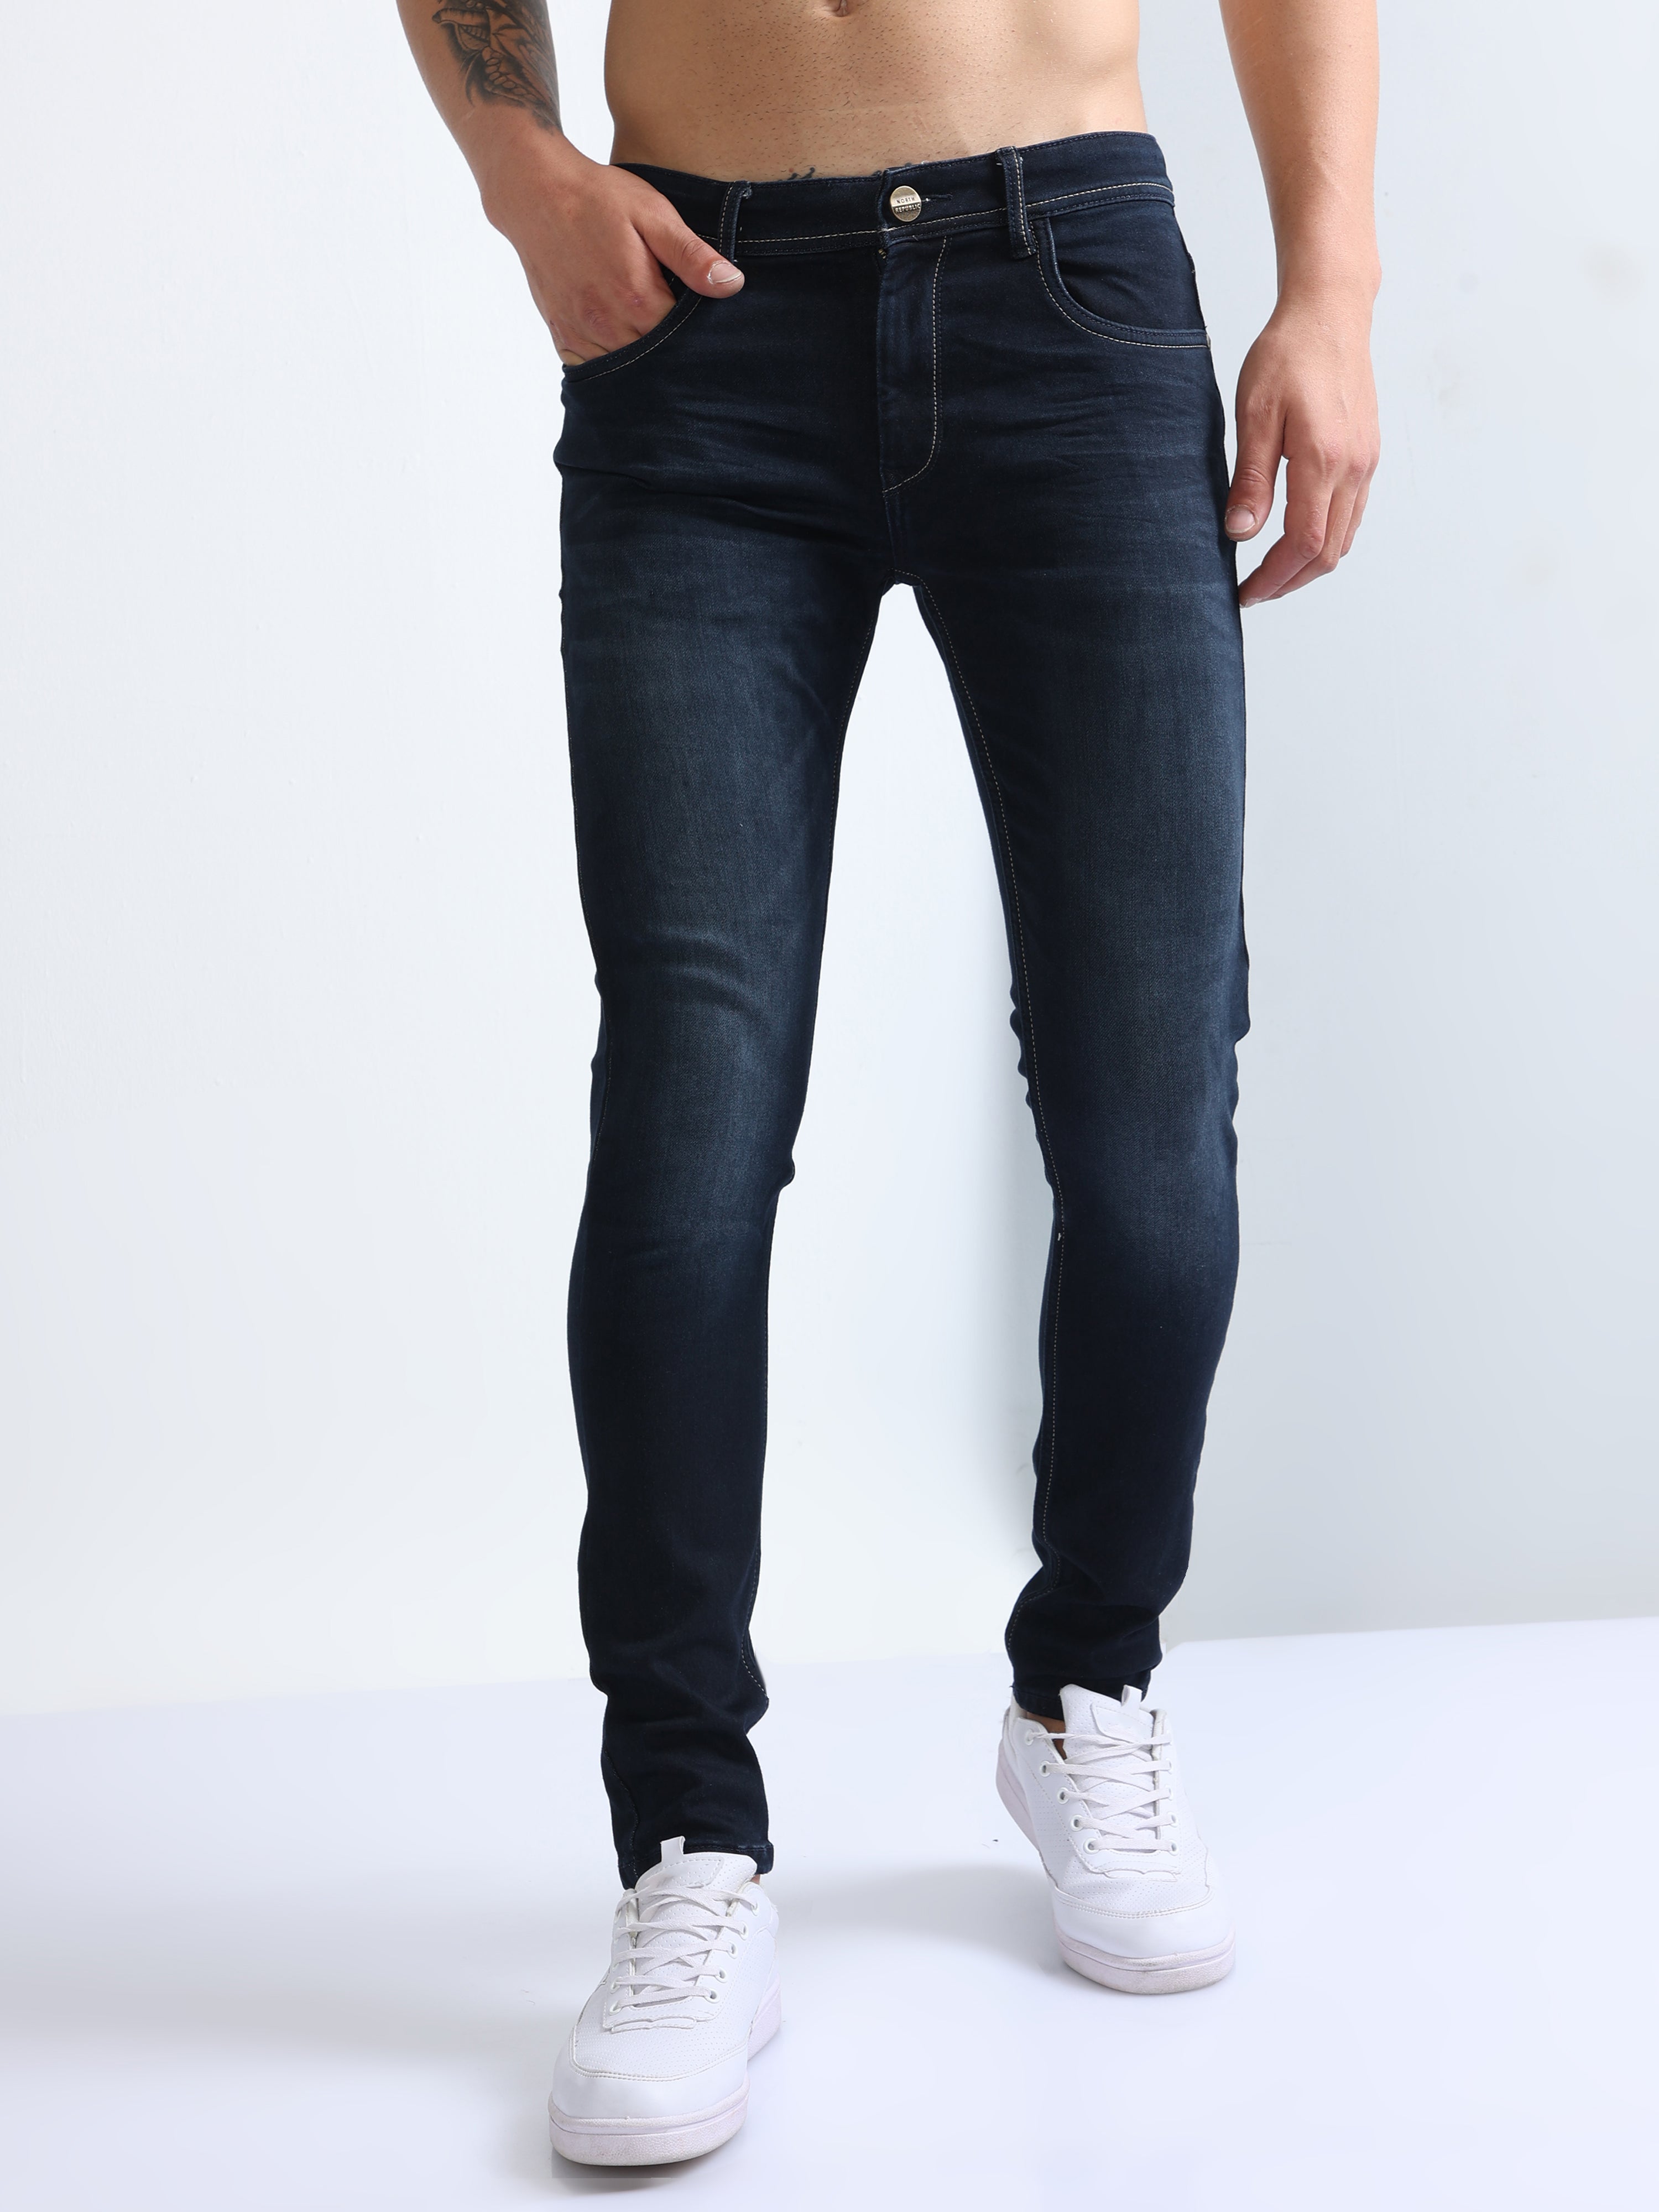 Japanese Dark Wash Non-Stretch Jeans - Custom Fit Pants